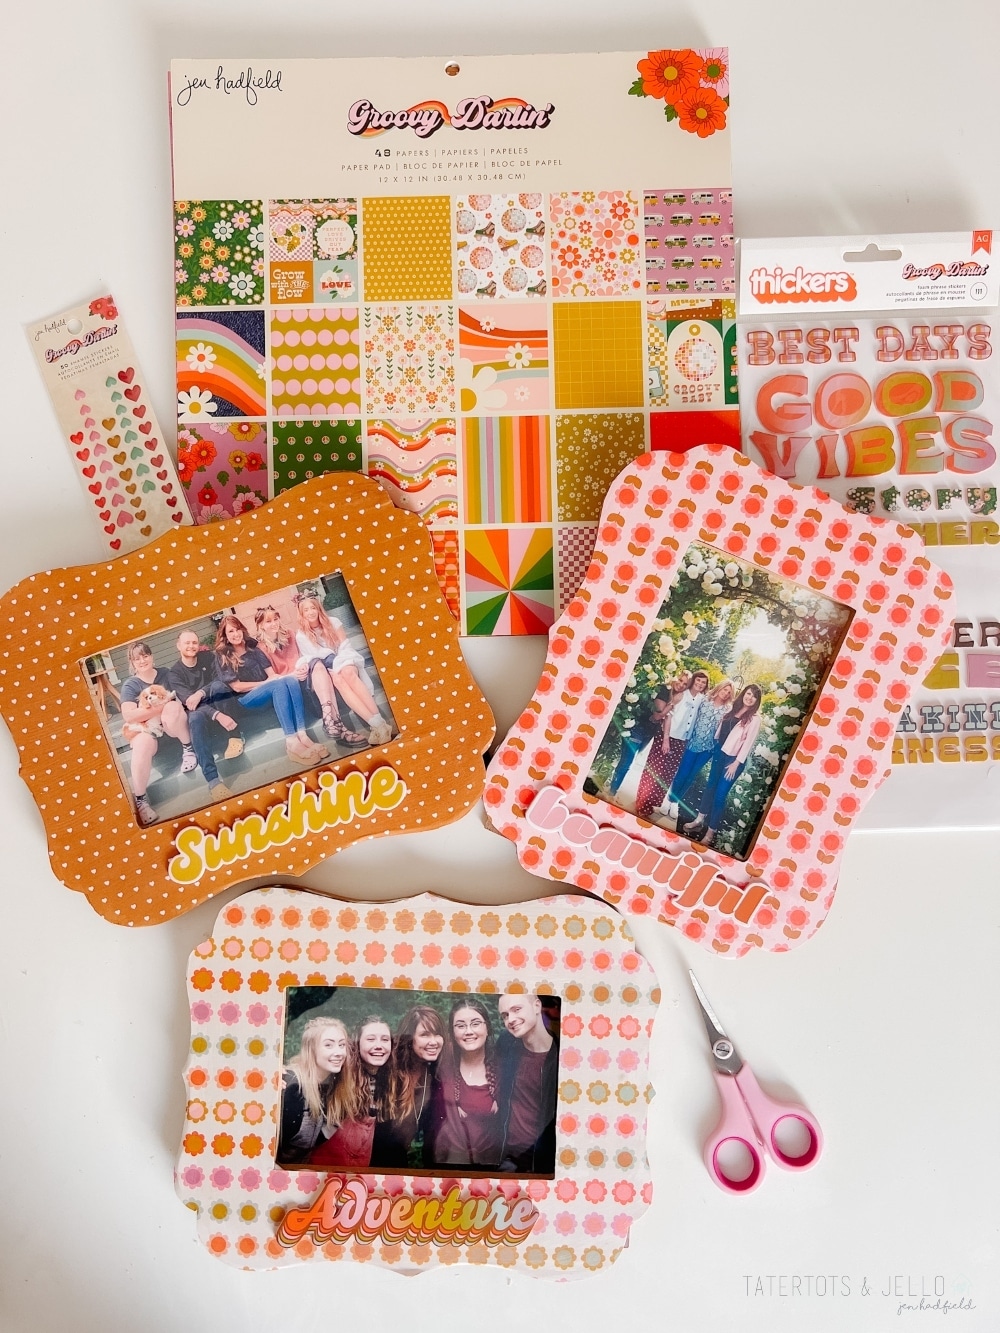 DIY Decoupaged Frames. Decoupage wood picture frames with paper for a fun and personalized craft perfect for kids' activities, birthday parties, or girls' night in.